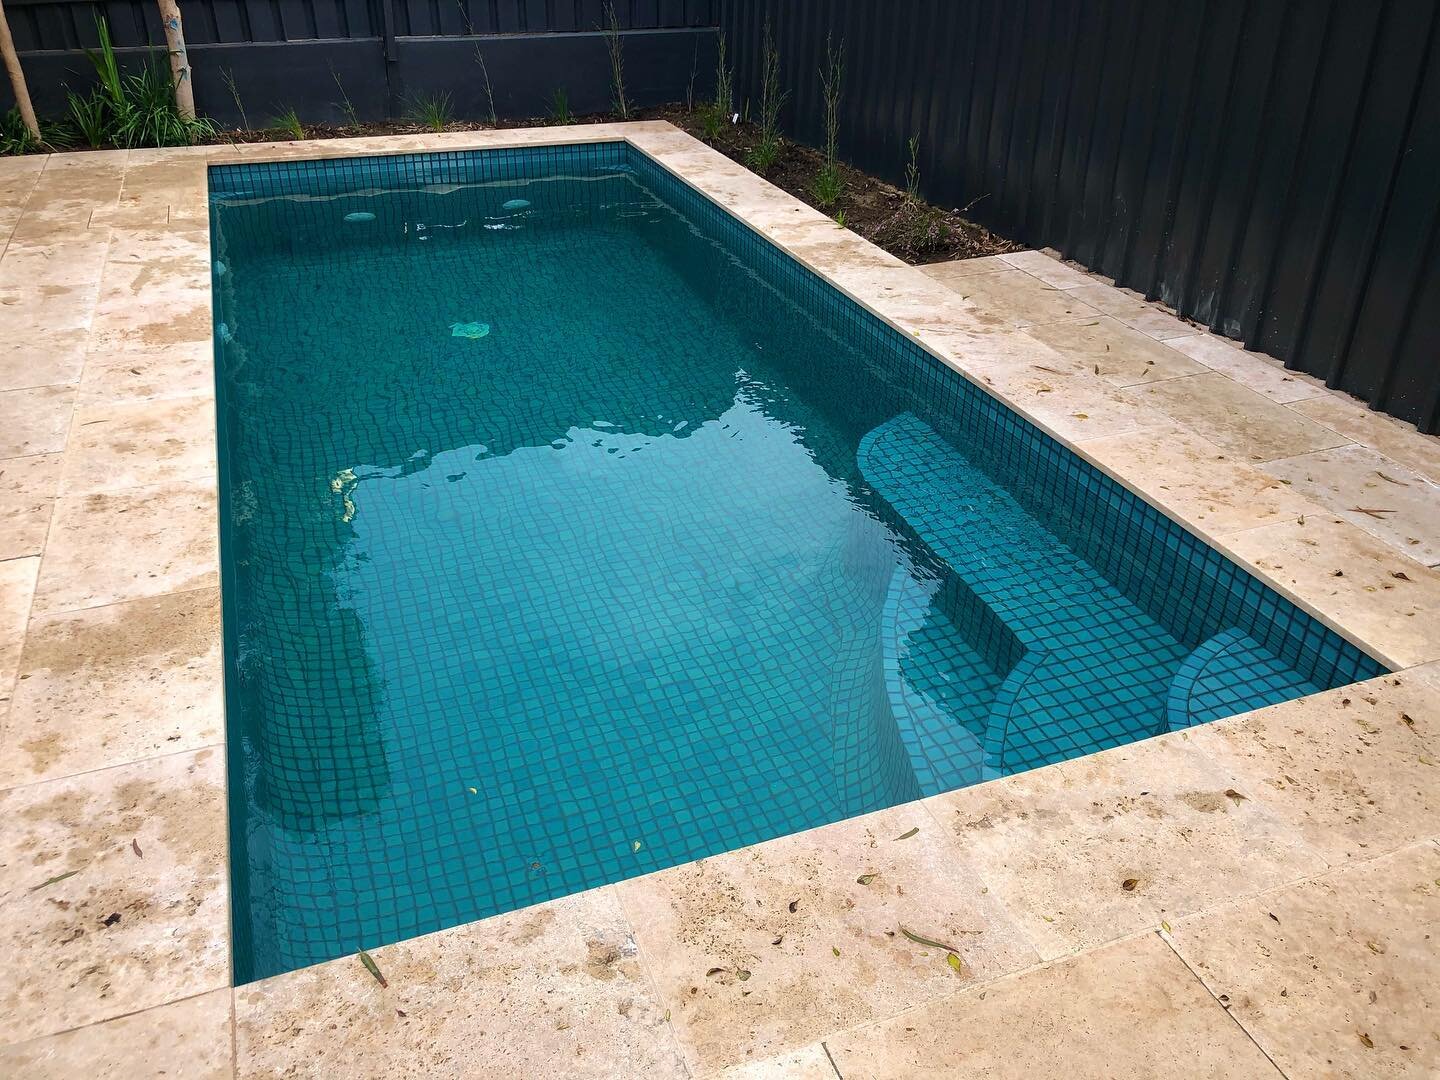 Recently finished 2.5x6.0 plunge pool looking sharp with travertine and island sea mosaics #plungepool #mosaics #travertine #poolbuilders #concretepool